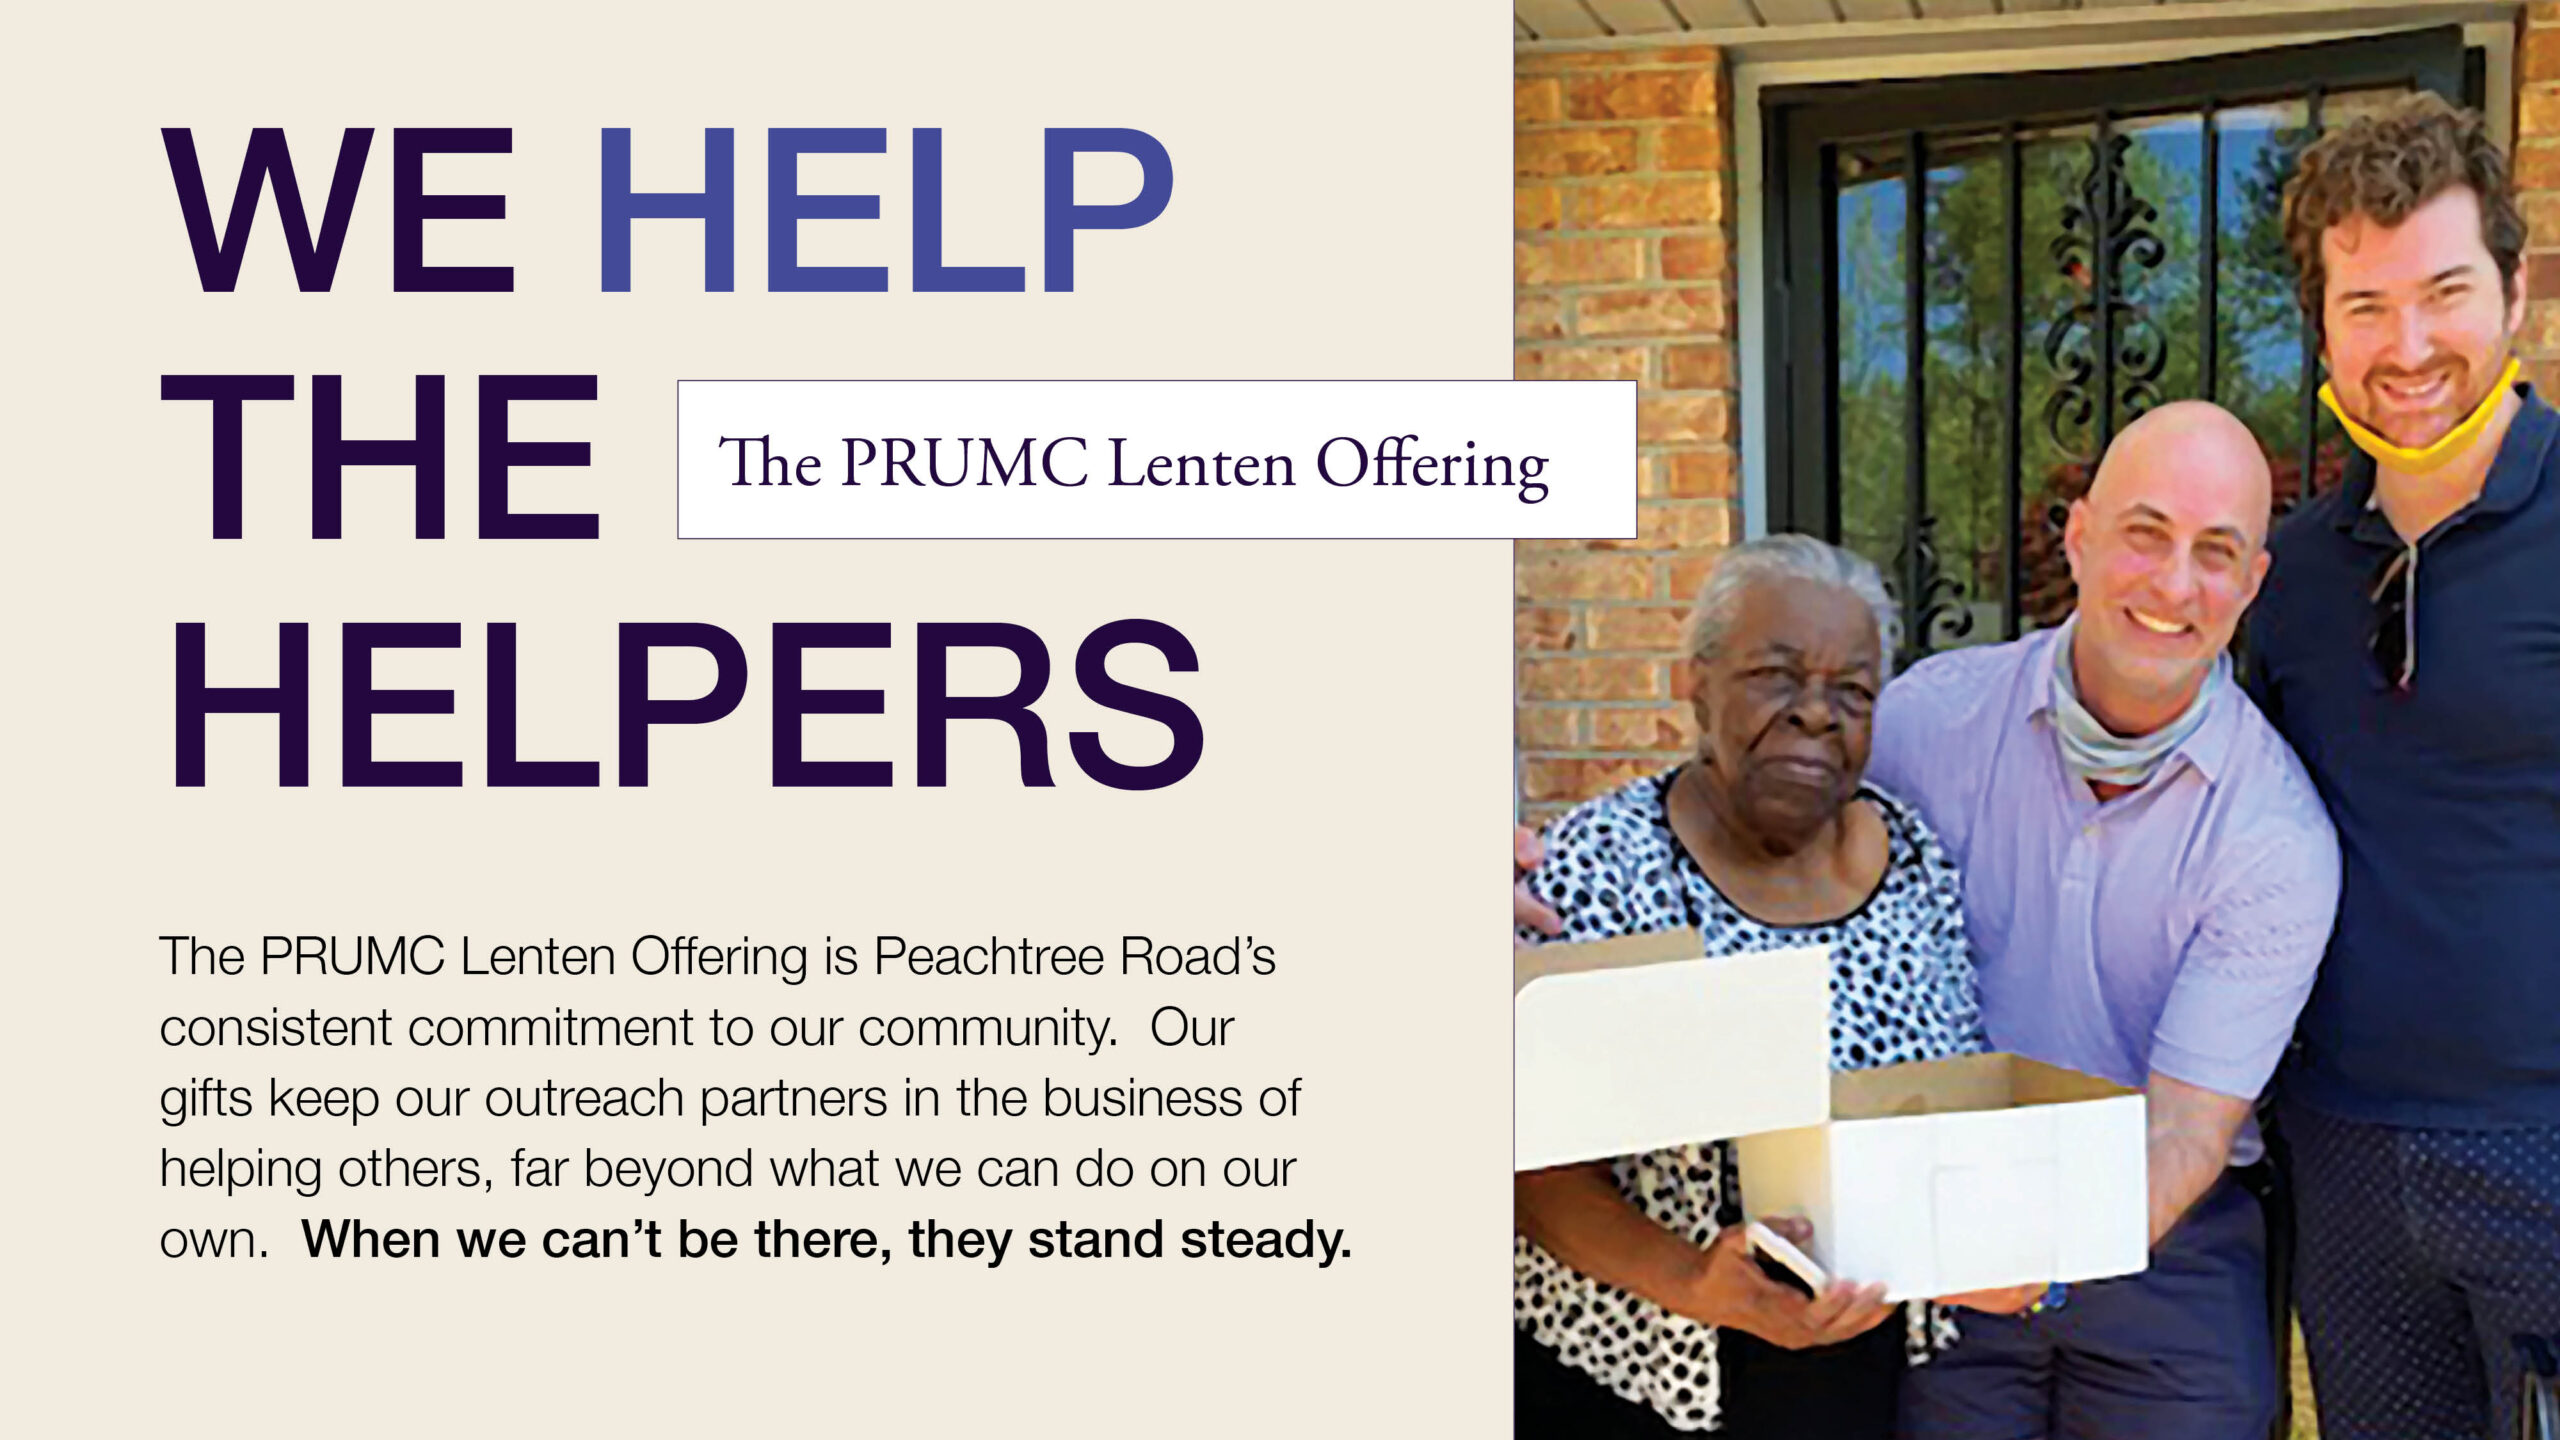 The PRUMC Lenten Offering: We Help the Helpers. Donate to support our local outreach partners in Atlanta.